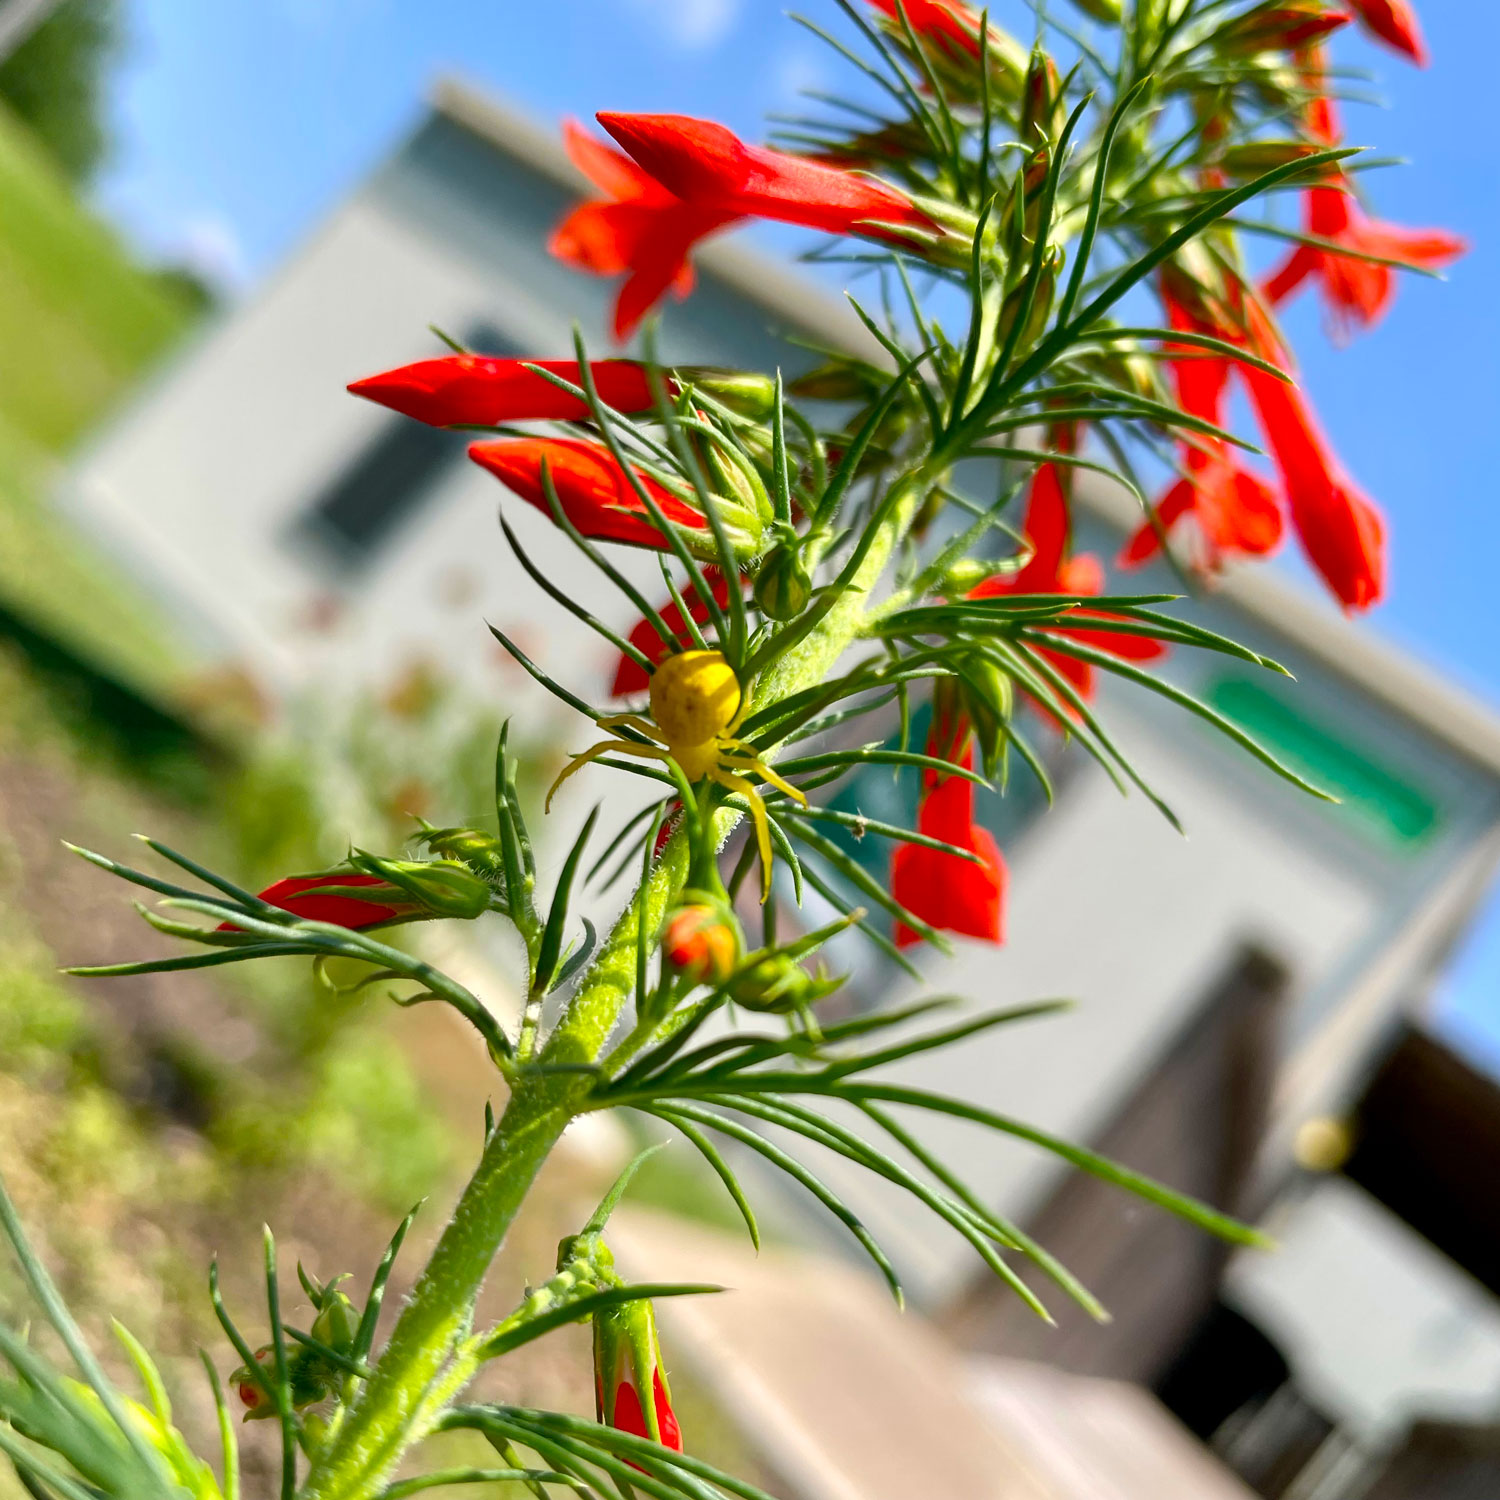 A yellow glass-like spider climbs betwen the red trumpet-like blossoms of a spiky green stalk.